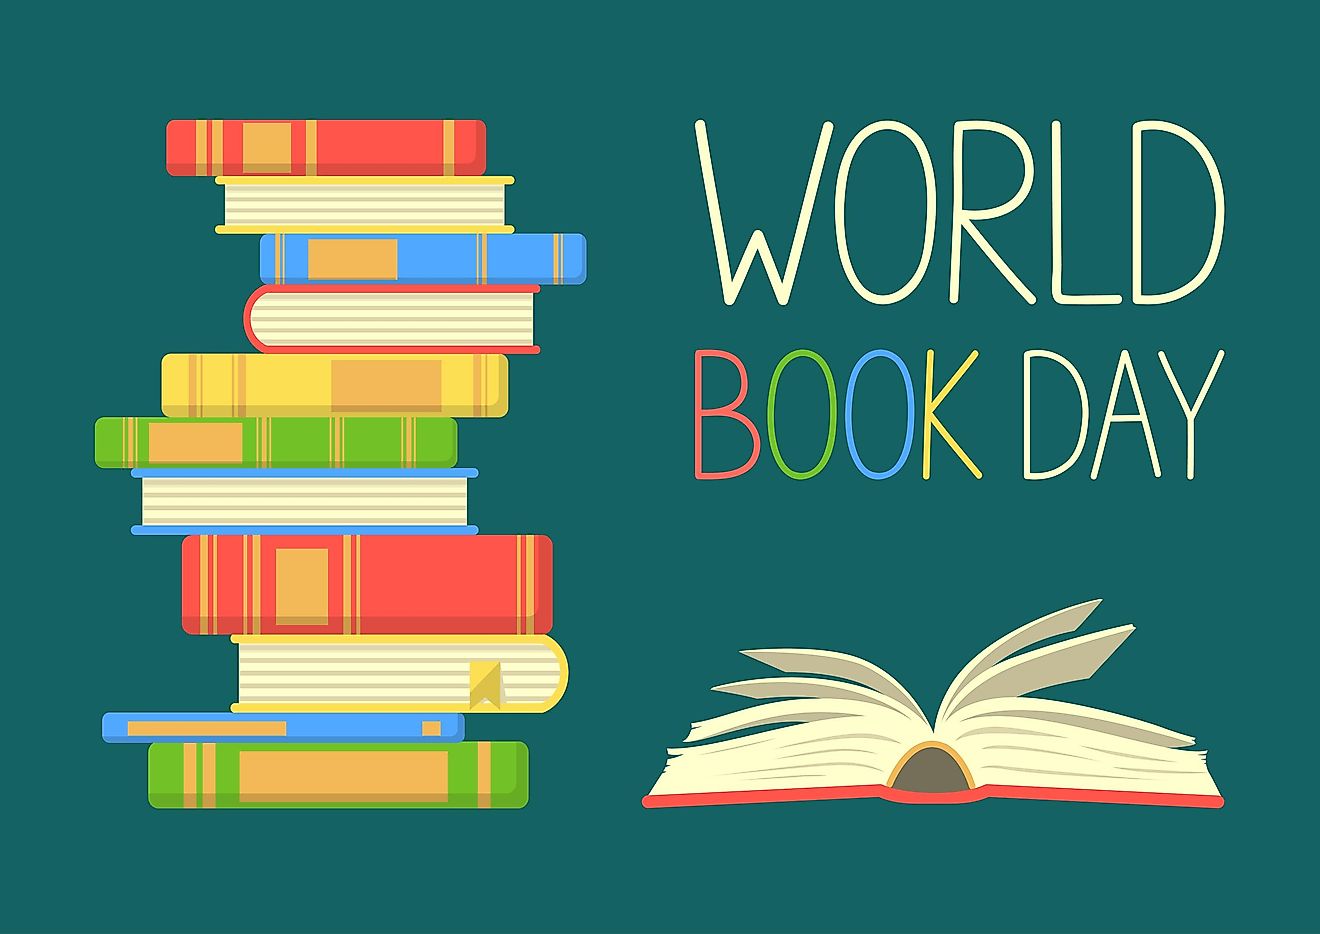 April 23 is World Book Day. 